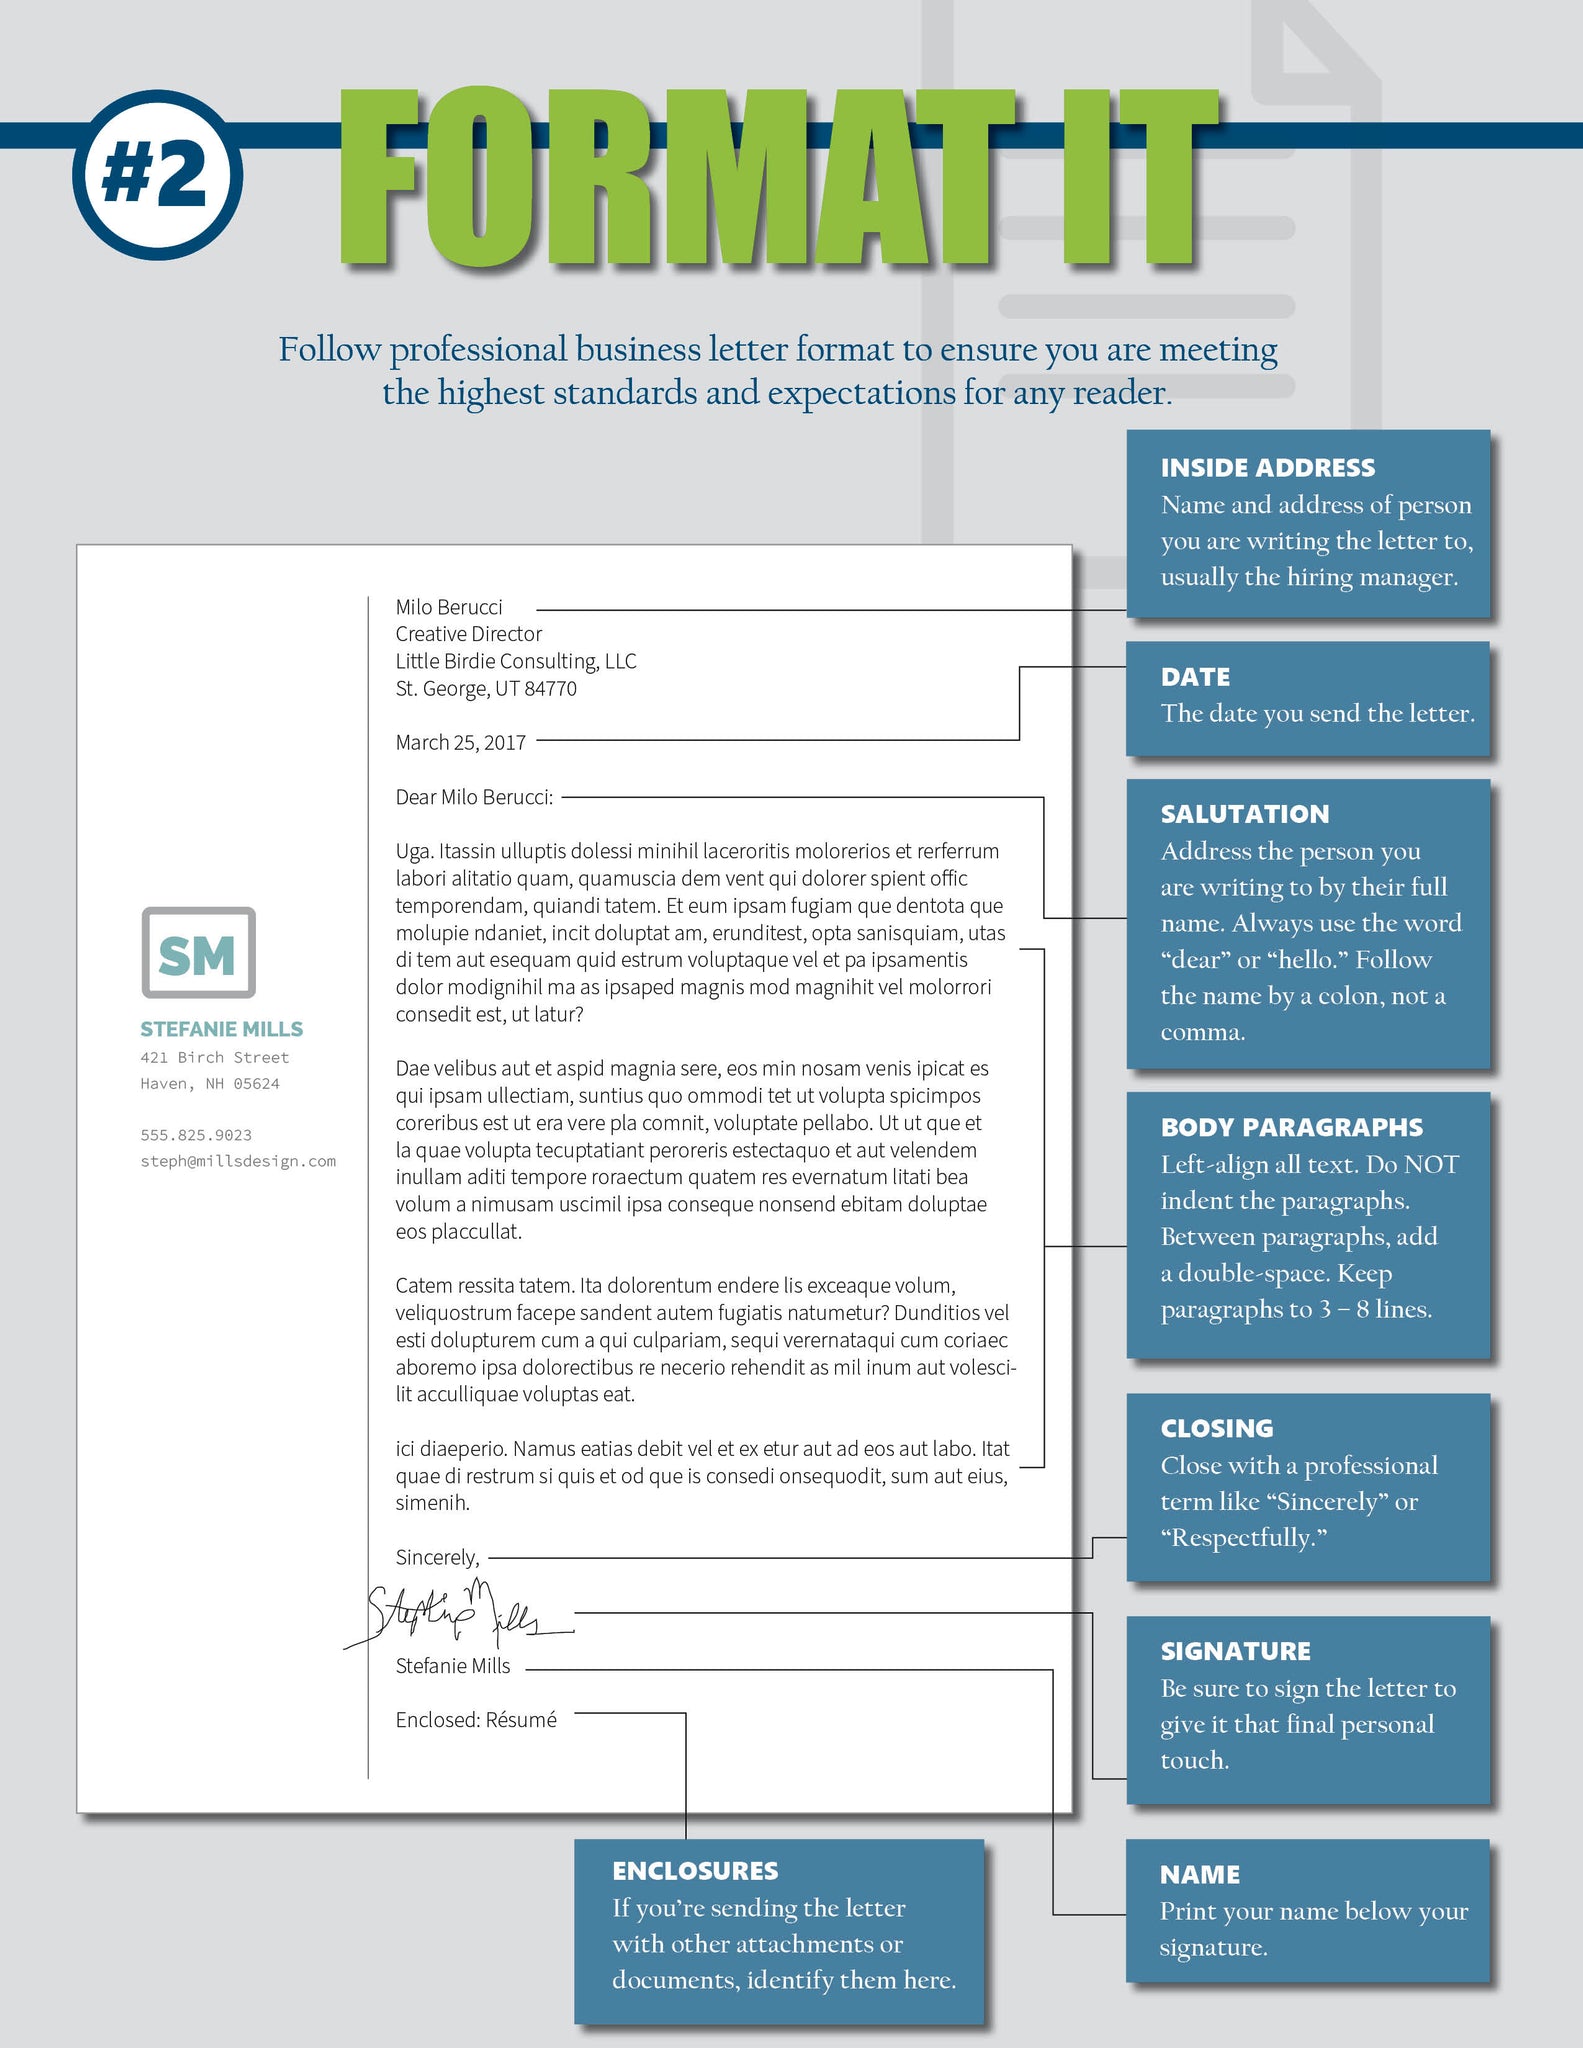 How to Write a Cover Letter - Quick Guide | **DIGITAL DOWNLOAD**